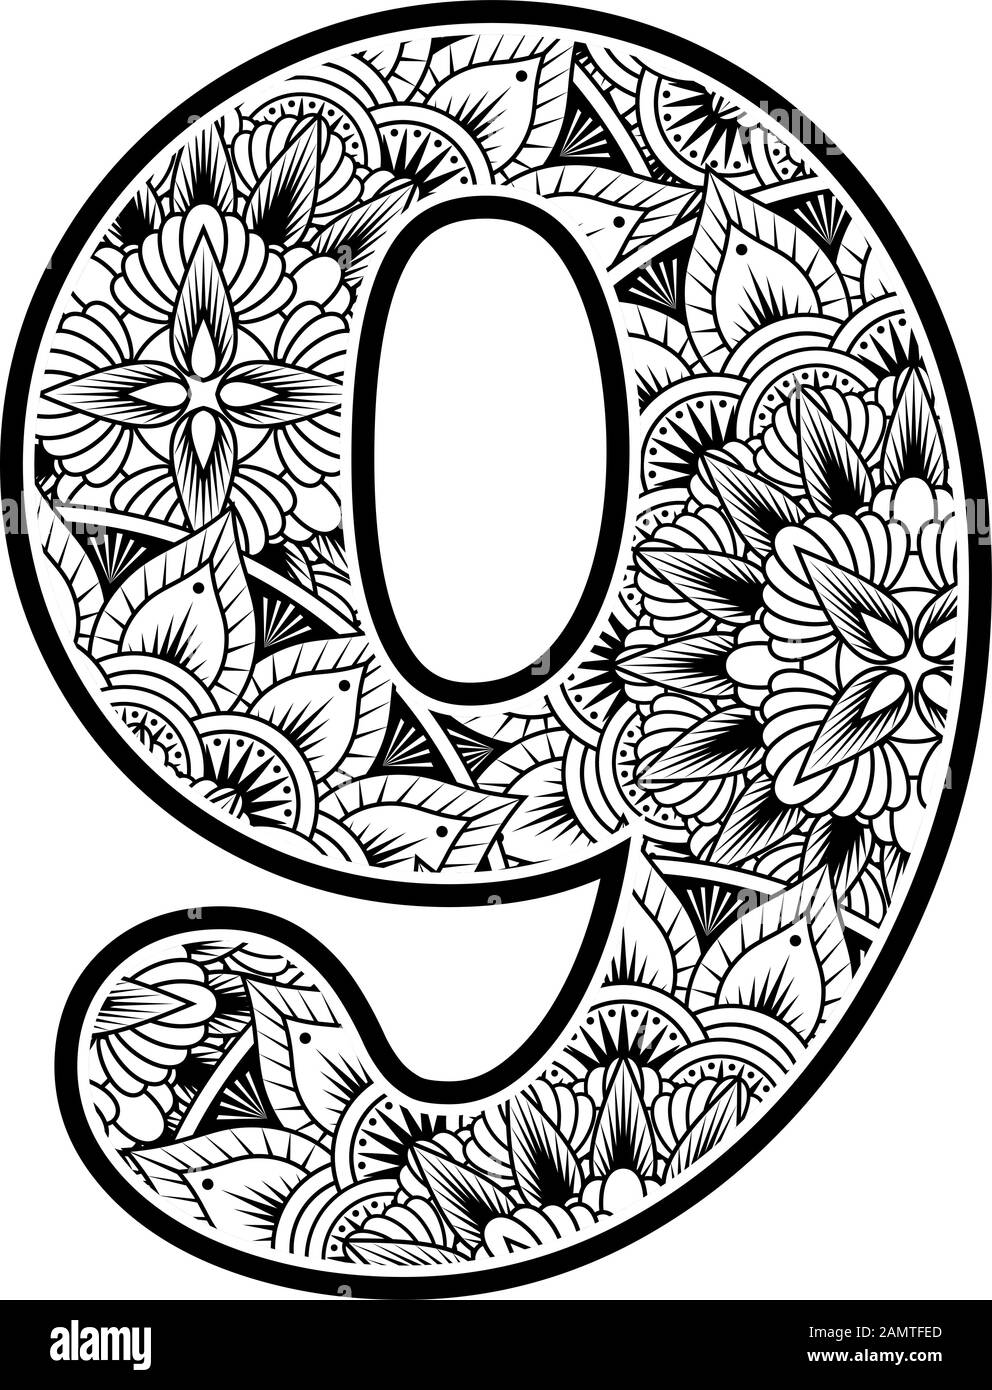 number 9 with abstract flowers ornaments in black and white. design inspired from mandala art style for coloring. Isolated on white background Stock Vector